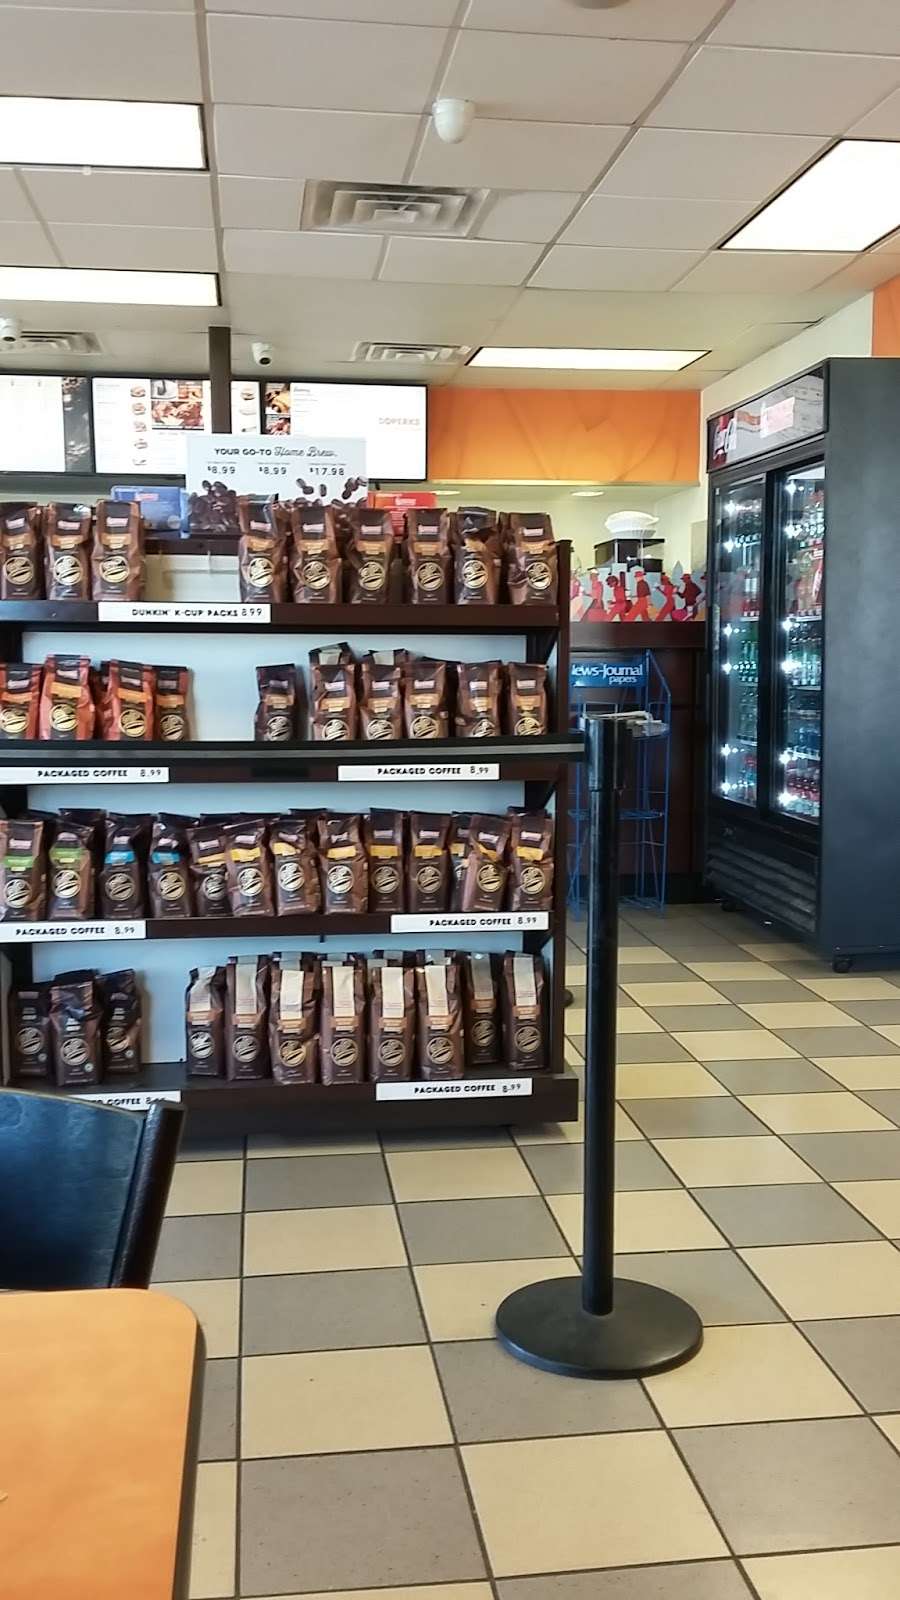 Dunkin Donuts | 4004 N Dupont Hwy, New Castle, DE 19720 | Phone: (302) 658-2222